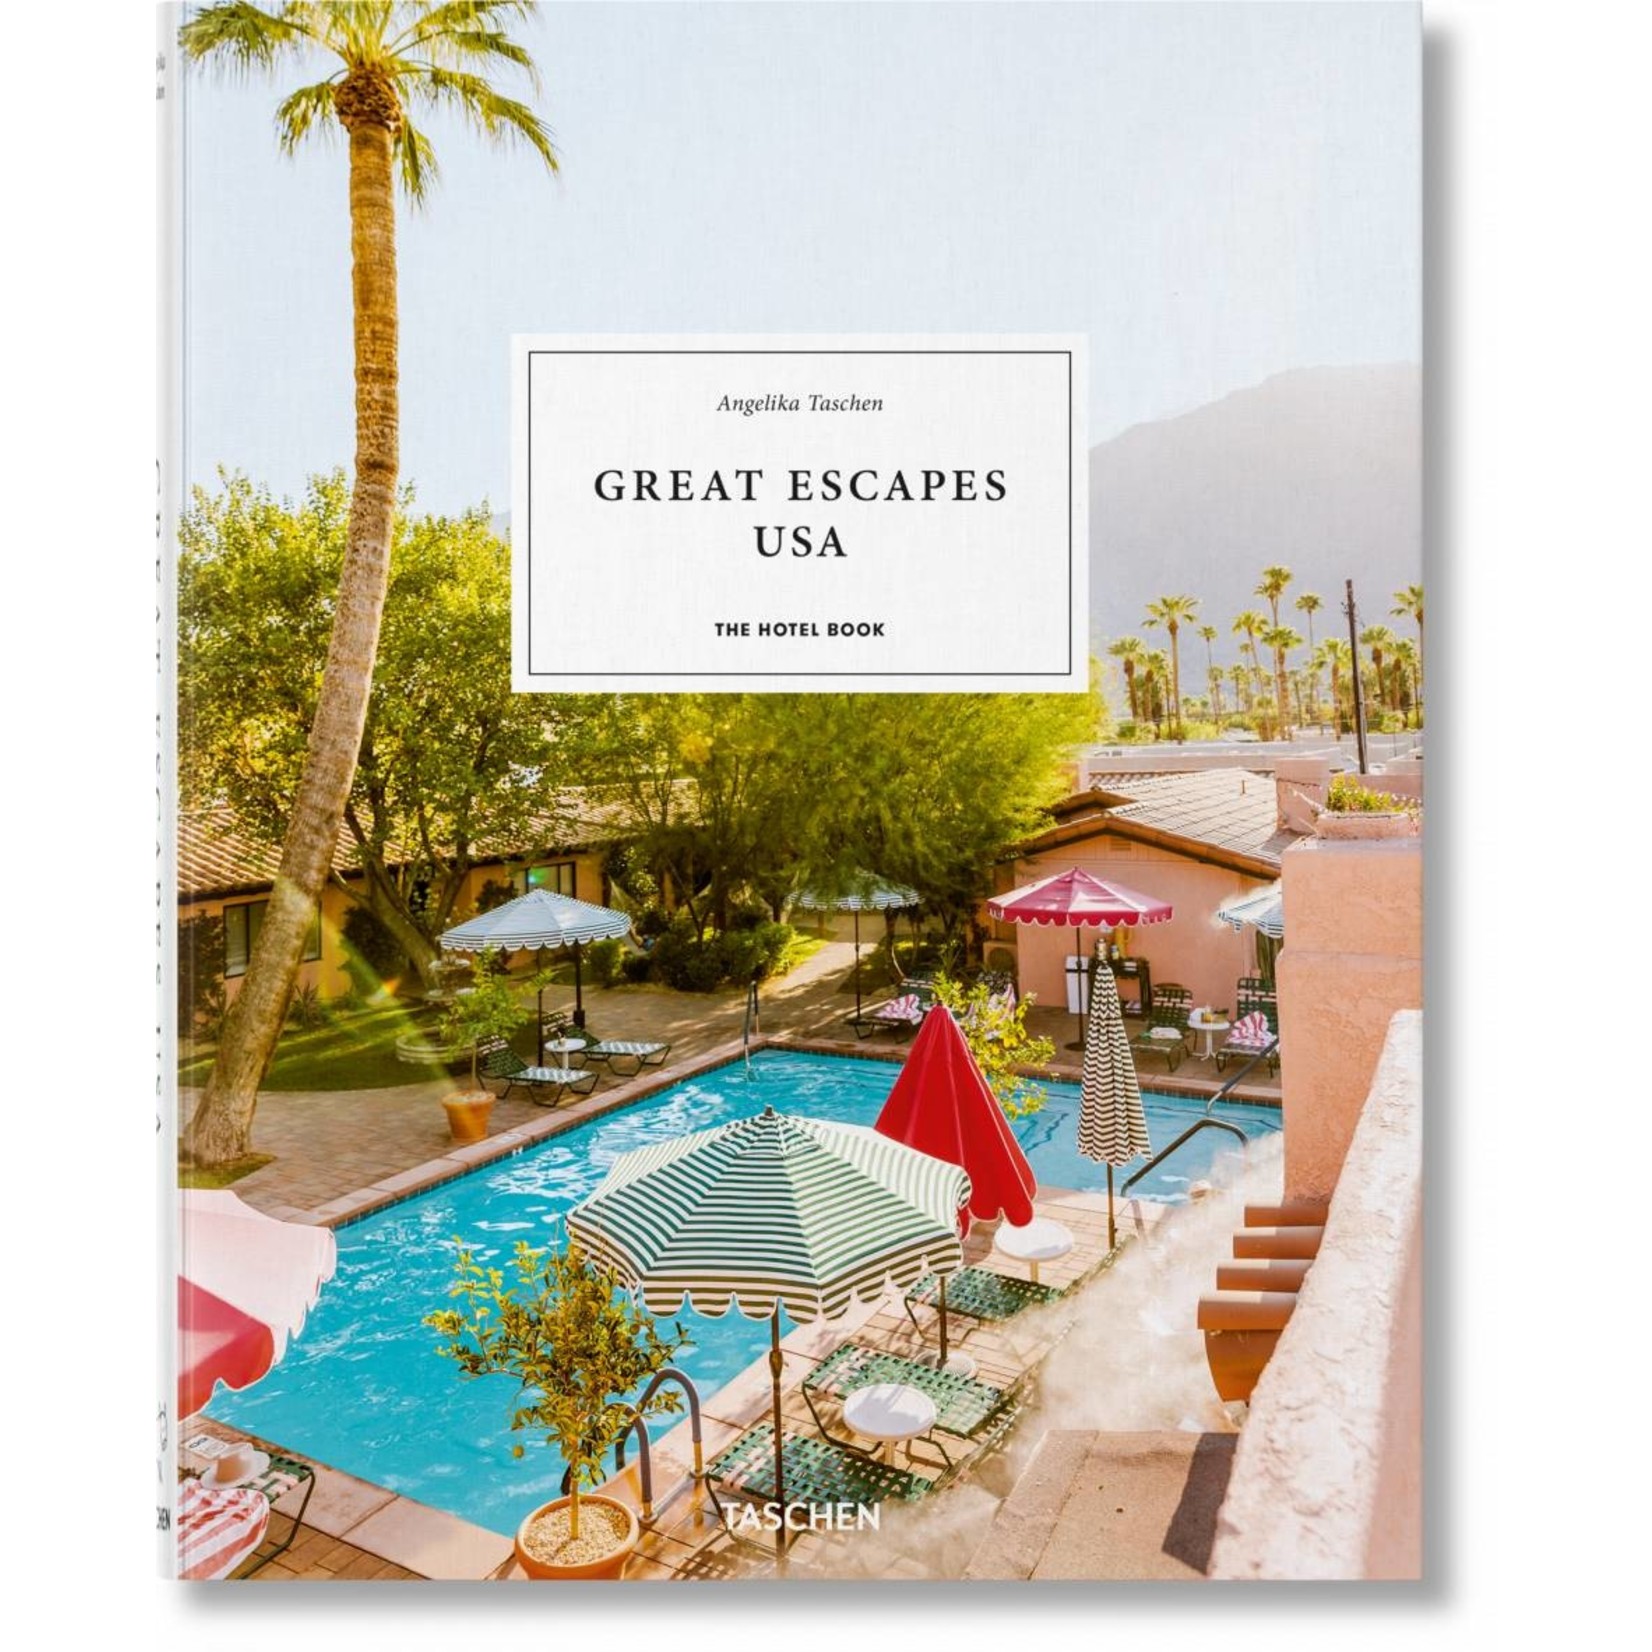 Great Escapes: The Hotel Book